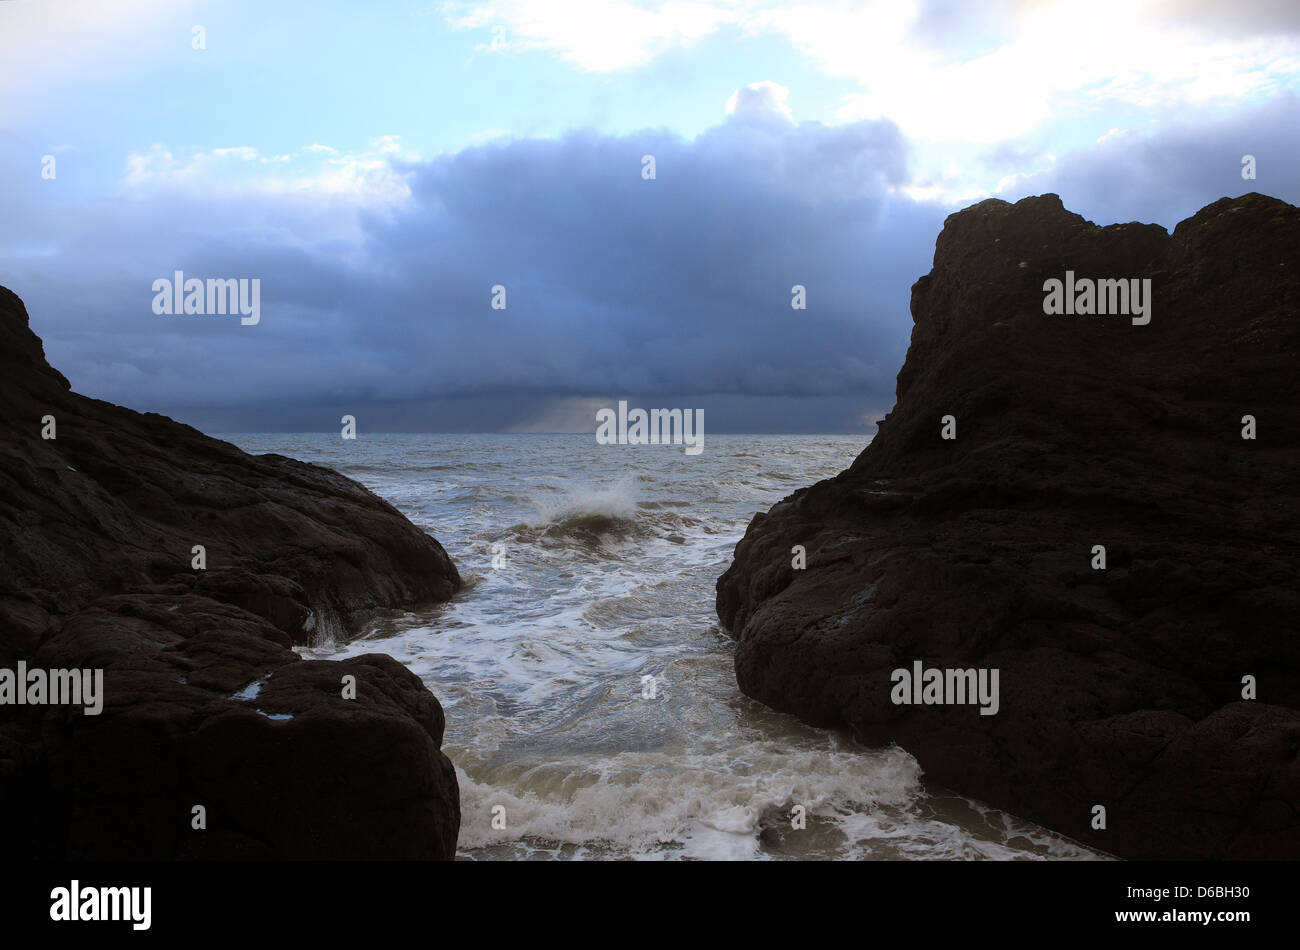 Fife Coastline at Elie in Scotland showing changeable weather systems Stock Photo